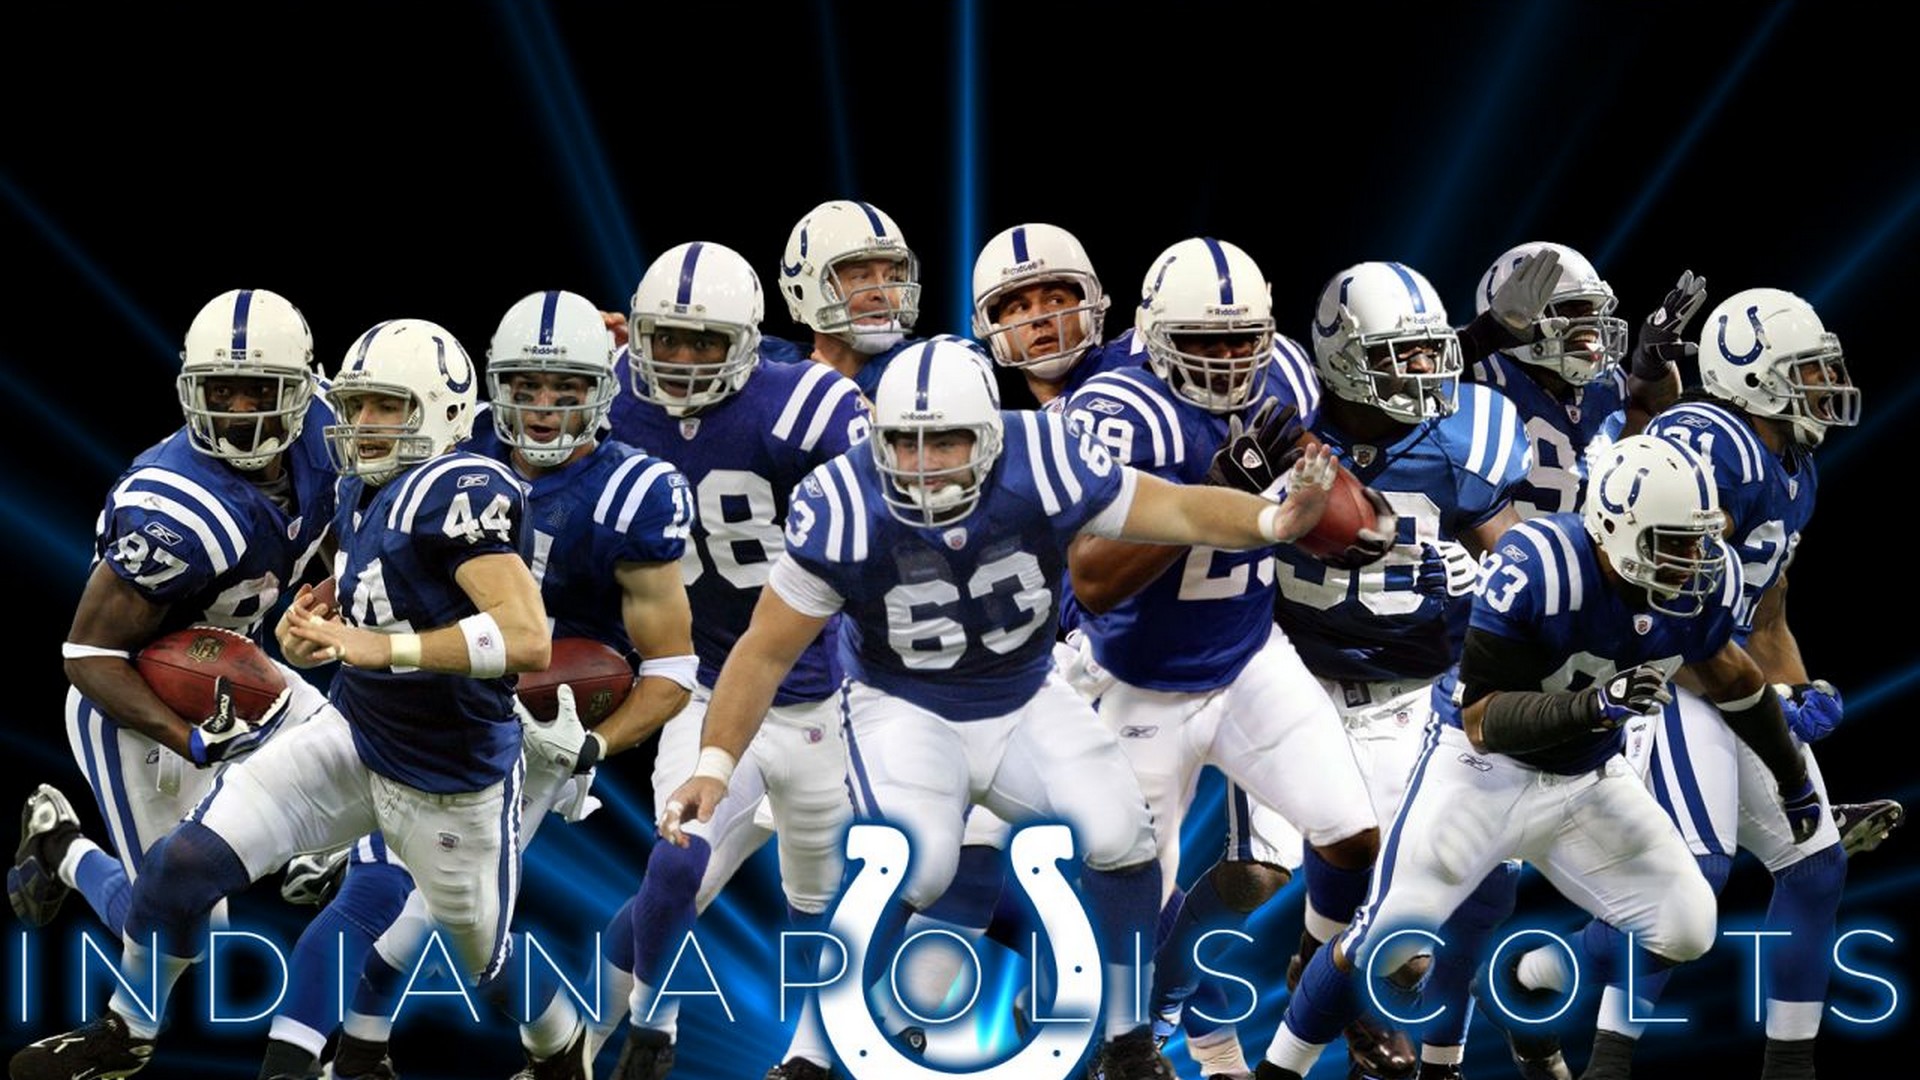 HD Indianapolis Colts NFL Backgrounds with resolution 1920x1080 pixel. You can make this wallpaper for your Mac or Windows Desktop Background, iPhone, Android or Tablet and another Smartphone device